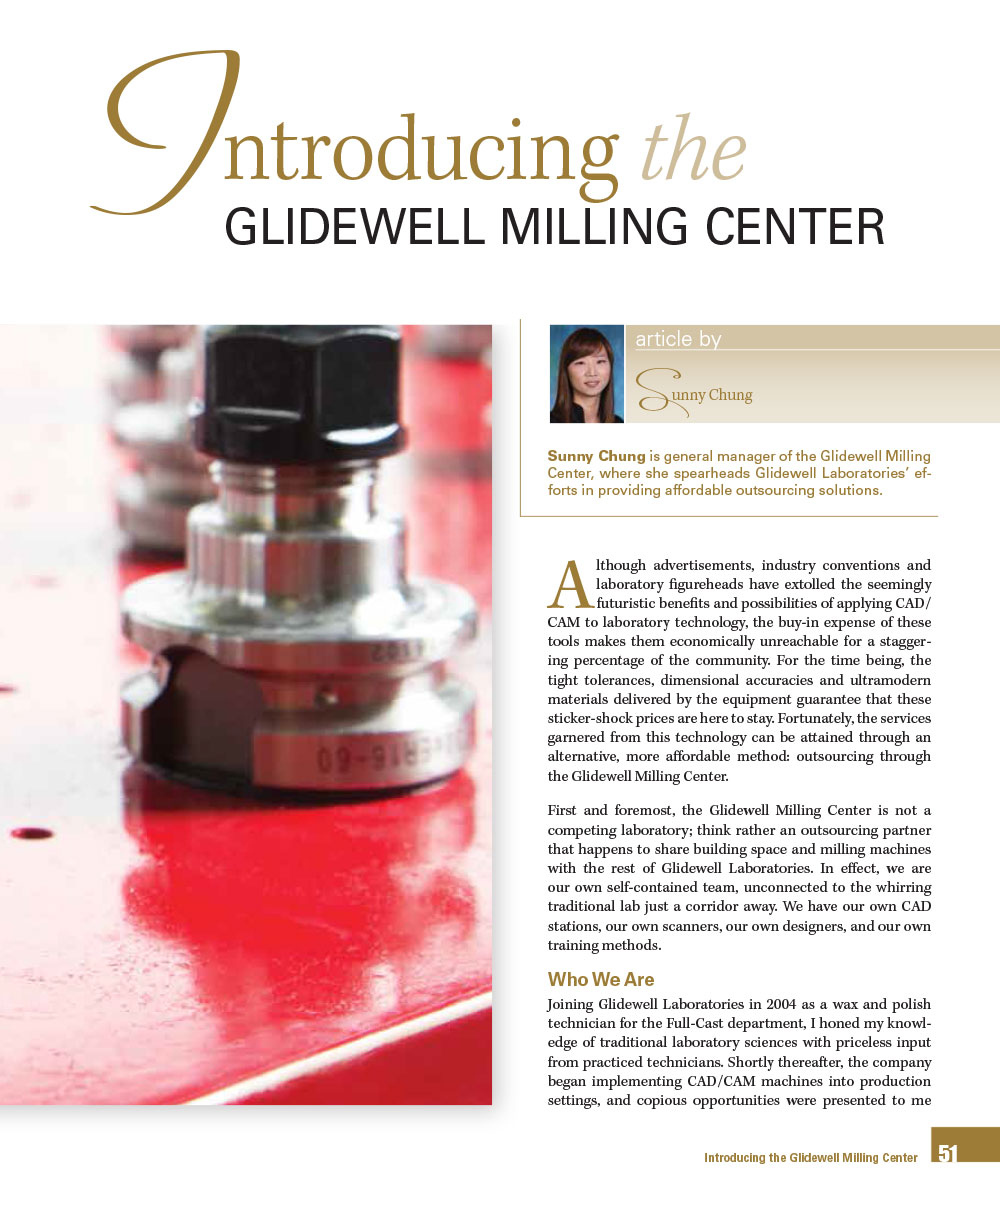 Introducing the Glidewell Milling Center